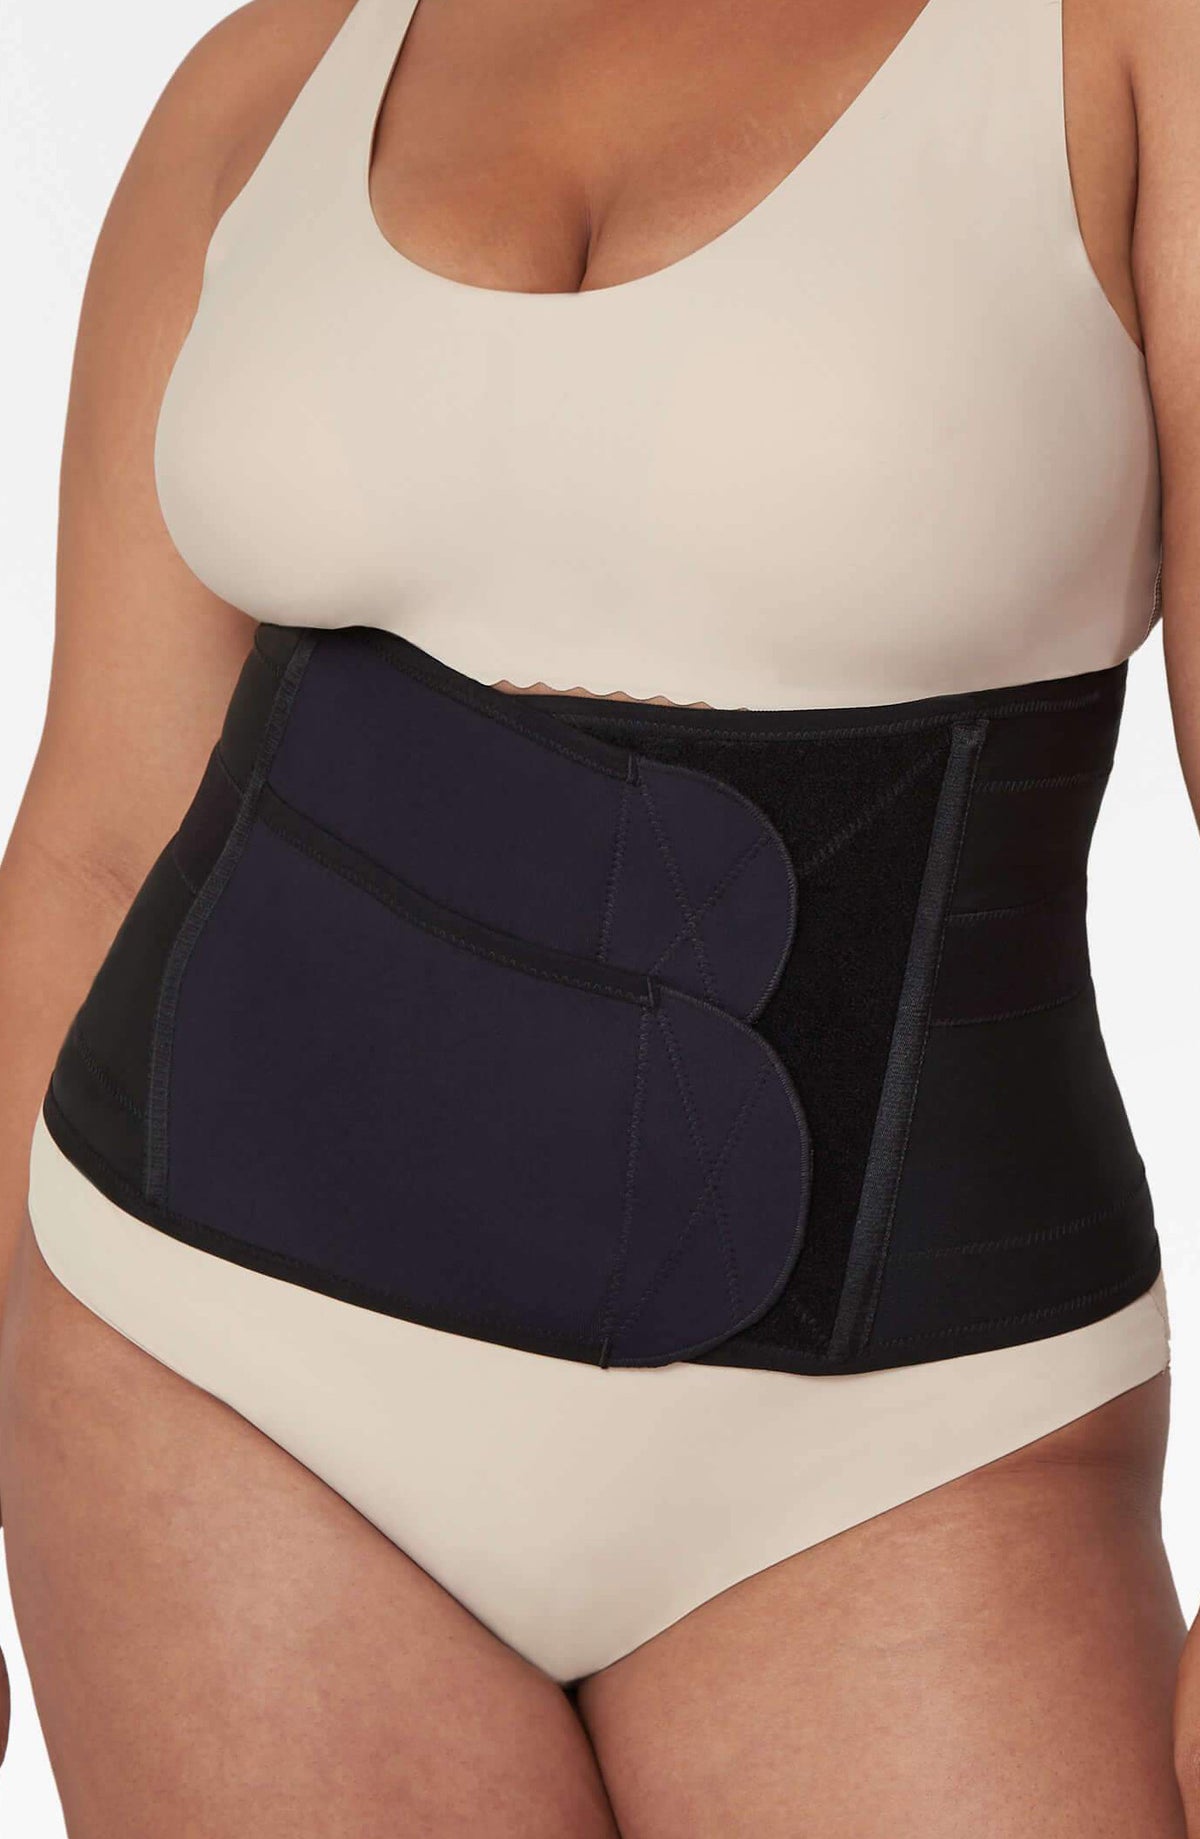 Waist Trainers for the Post Baby Belly: Are They Safe?